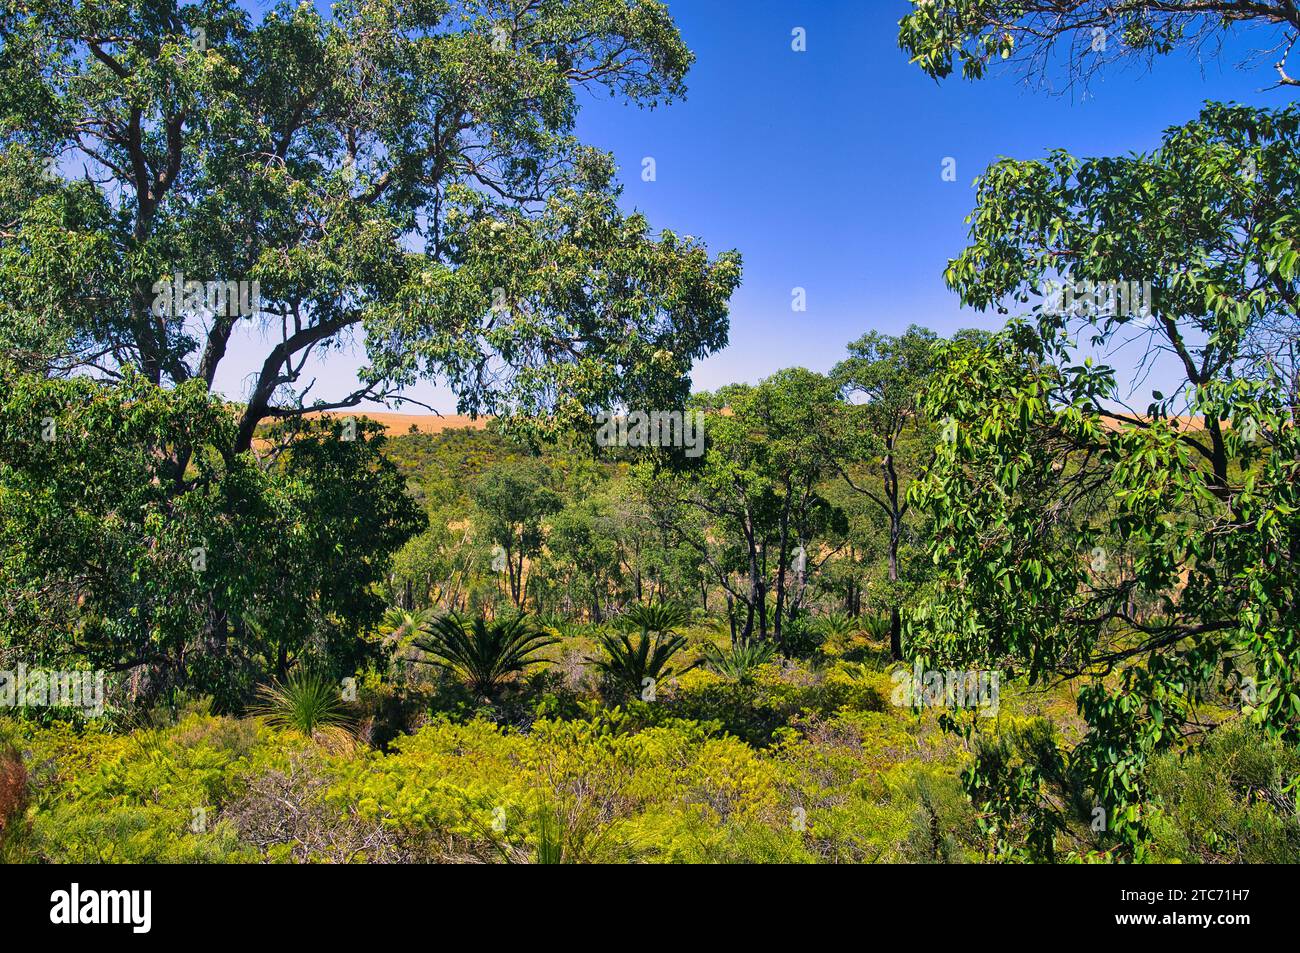 Landscape with eucalyptus trees, grass trees and green shrub vegetation in Lesueur National Park in the Western Australian Wheat Belt. Stock Photo